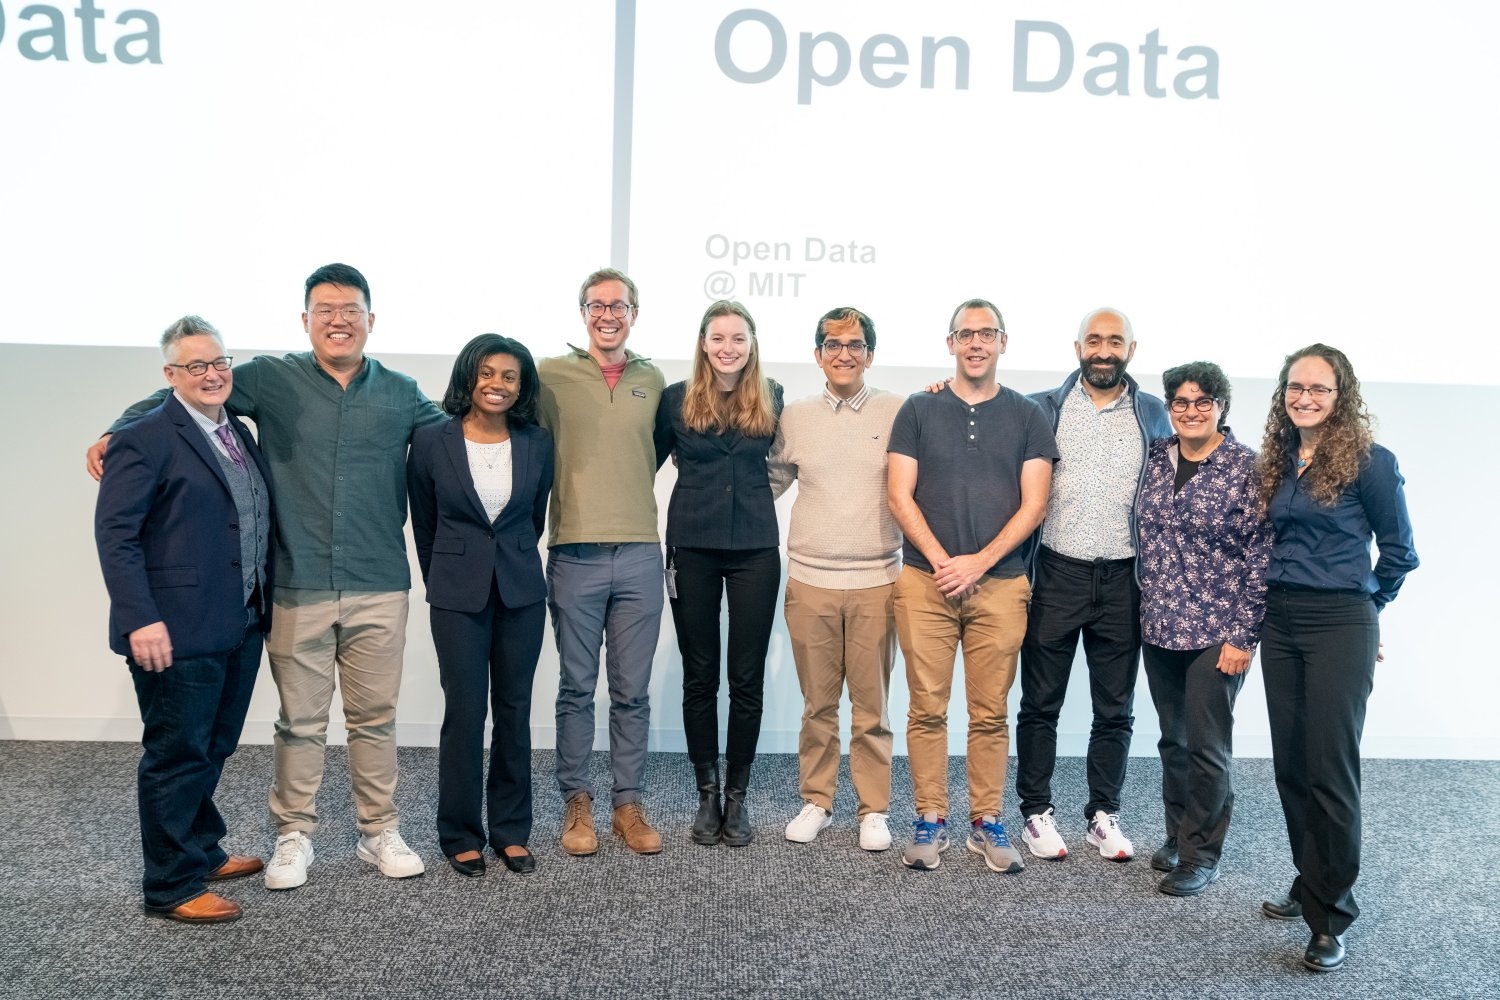 The MIT Prize for Open Data was awarded to 10 projects representing several MIT schools and research centers. Left to right: Chris Bourg, Suyeol Yun, Raechel Walker, Matthew Groh, Djuna von Maydell, Maanas Sharma, Tom Pollard, Pedro Reynolds-Cuéllar, Nergis Mavalvala, and Rebecca Saxe. Not pictured: Yunsie Chung, Joseph Replogle, and Jonathan Zheng.